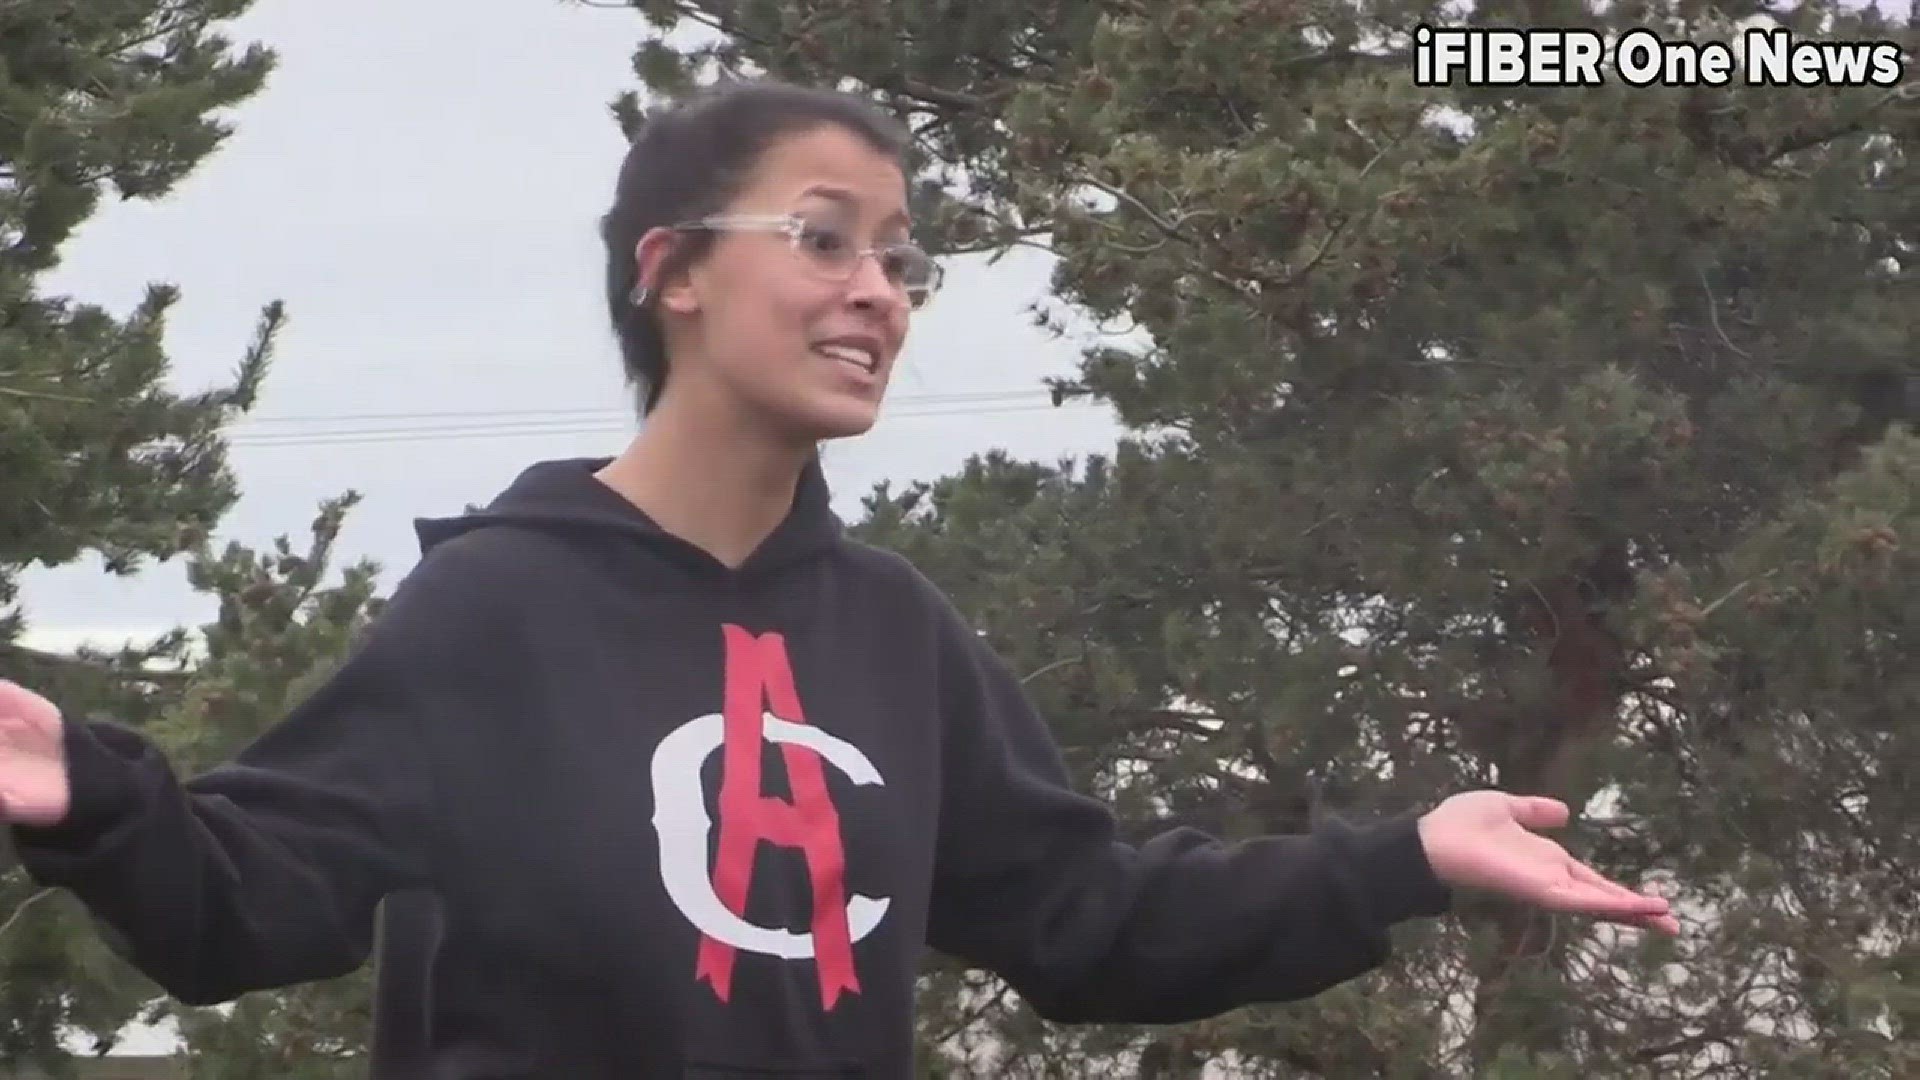 Angelica Mansfield was the only student to speak at the Moses Lake High School walkout to protest gun violence. Video credit: iFIBER One News